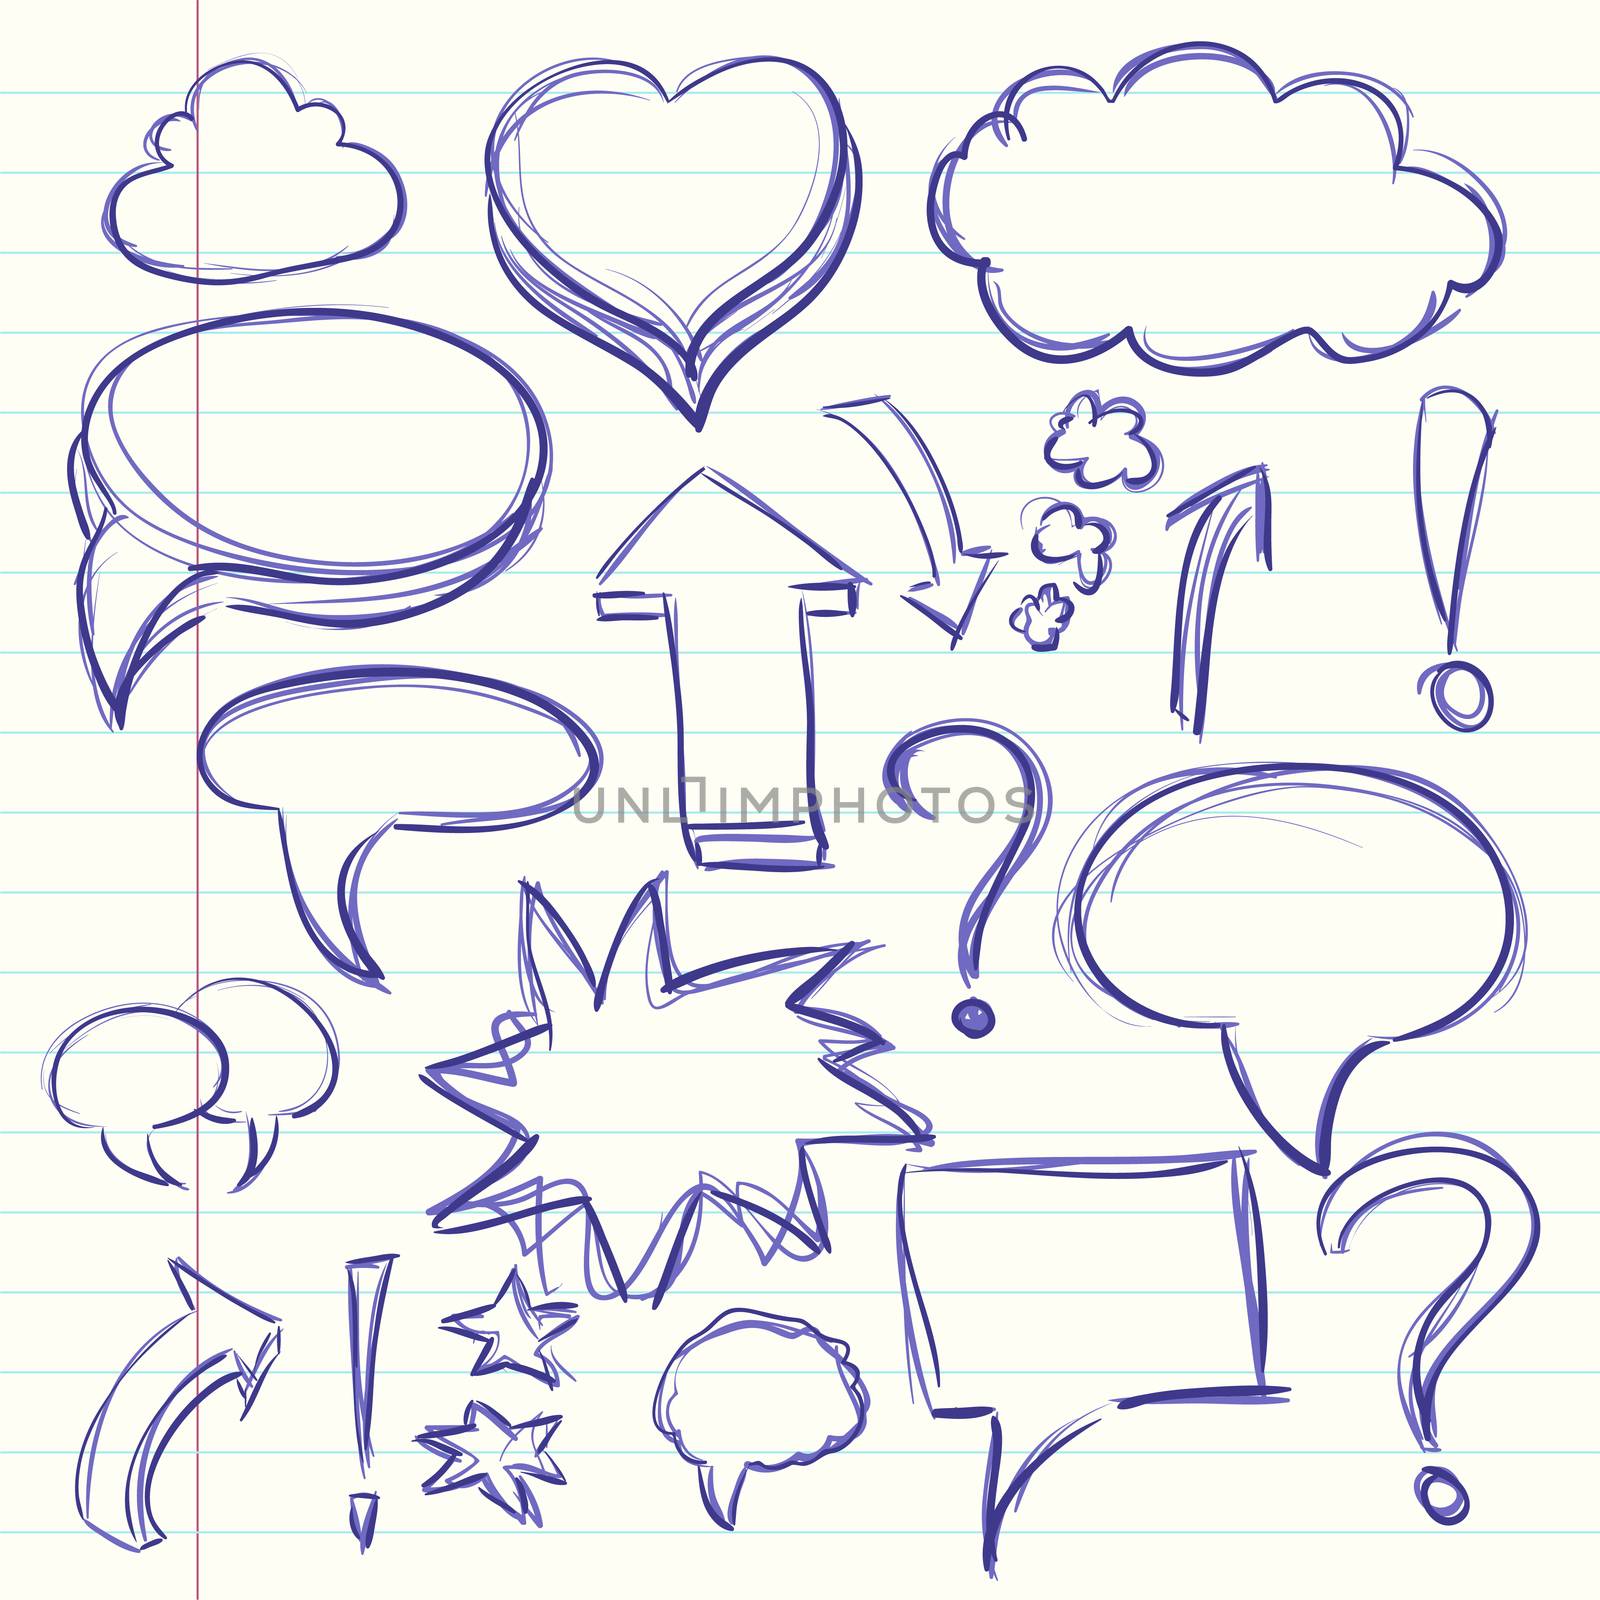 The cloud of thoughts conversation in the comics, exclamation and question marks. Collection sketch drawing. illustration